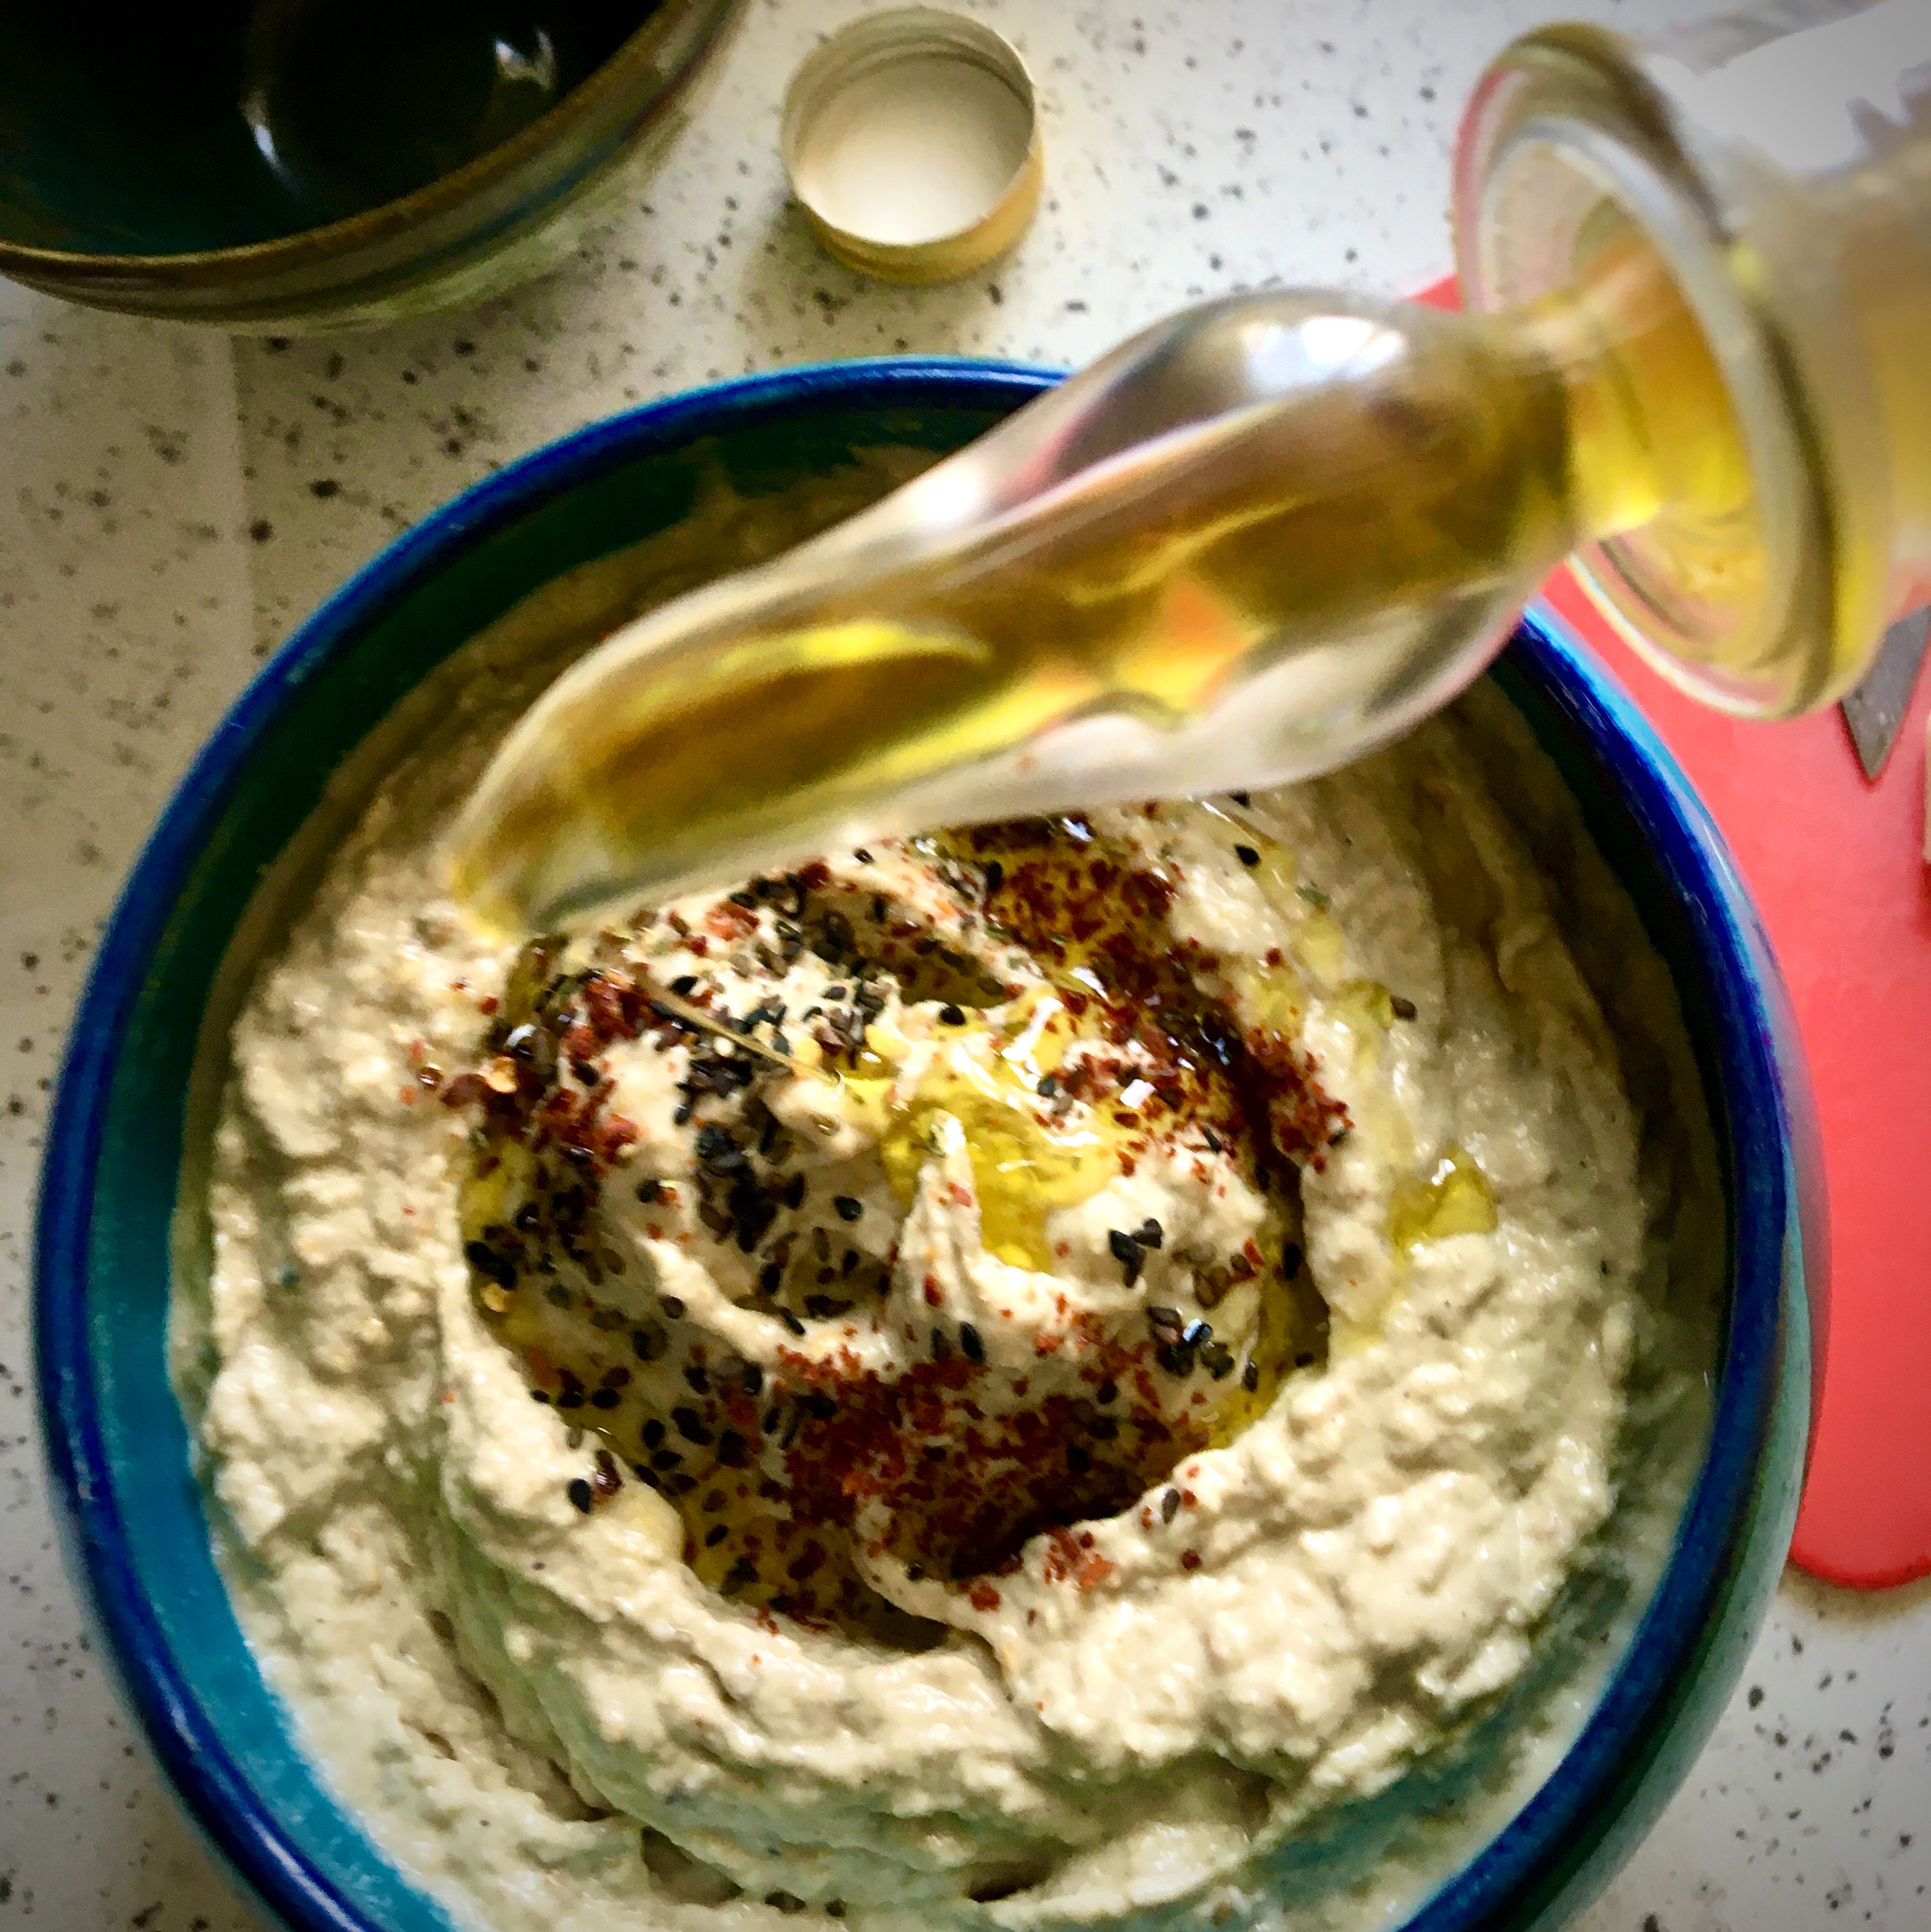 Peel off the eggplant and discard the skin. Fluff the flesh with a fork in a bowl. It would result for about 1.5-2 cups of smoked eggplant. Add tahini, yogurt if using, garlic and lemon juice. Season with sea salt and freshly grated black pepper. Stir well, taste and adjust the seasoning.